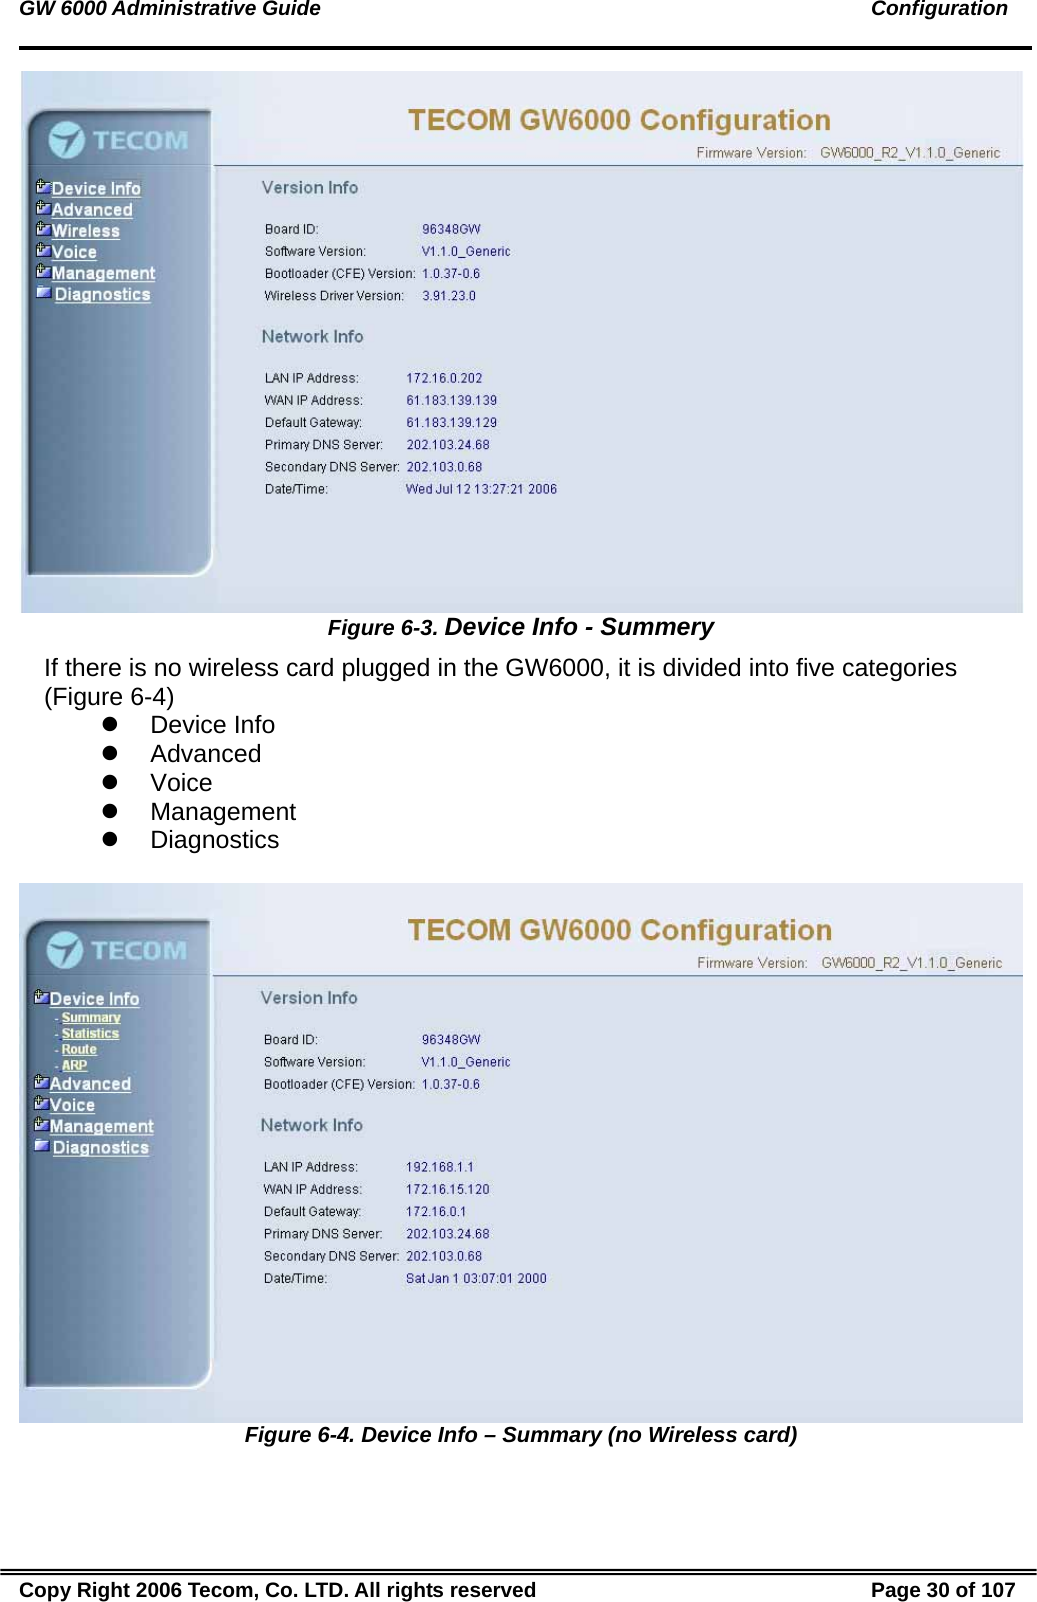 GW 6000 Administrative Guide                                                                                               Configuration  Figure 6-3. Device Info - Summery If there is no wireless card plugged in the GW6000, it is divided into five categories (Figure 6-4) z Device Info z Advanced z Voice z Management z Diagnostics   Figure 6-4. Device Info – Summary (no Wireless card) Copy Right 2006 Tecom, Co. LTD. All rights reserved  Page 30 of 107 